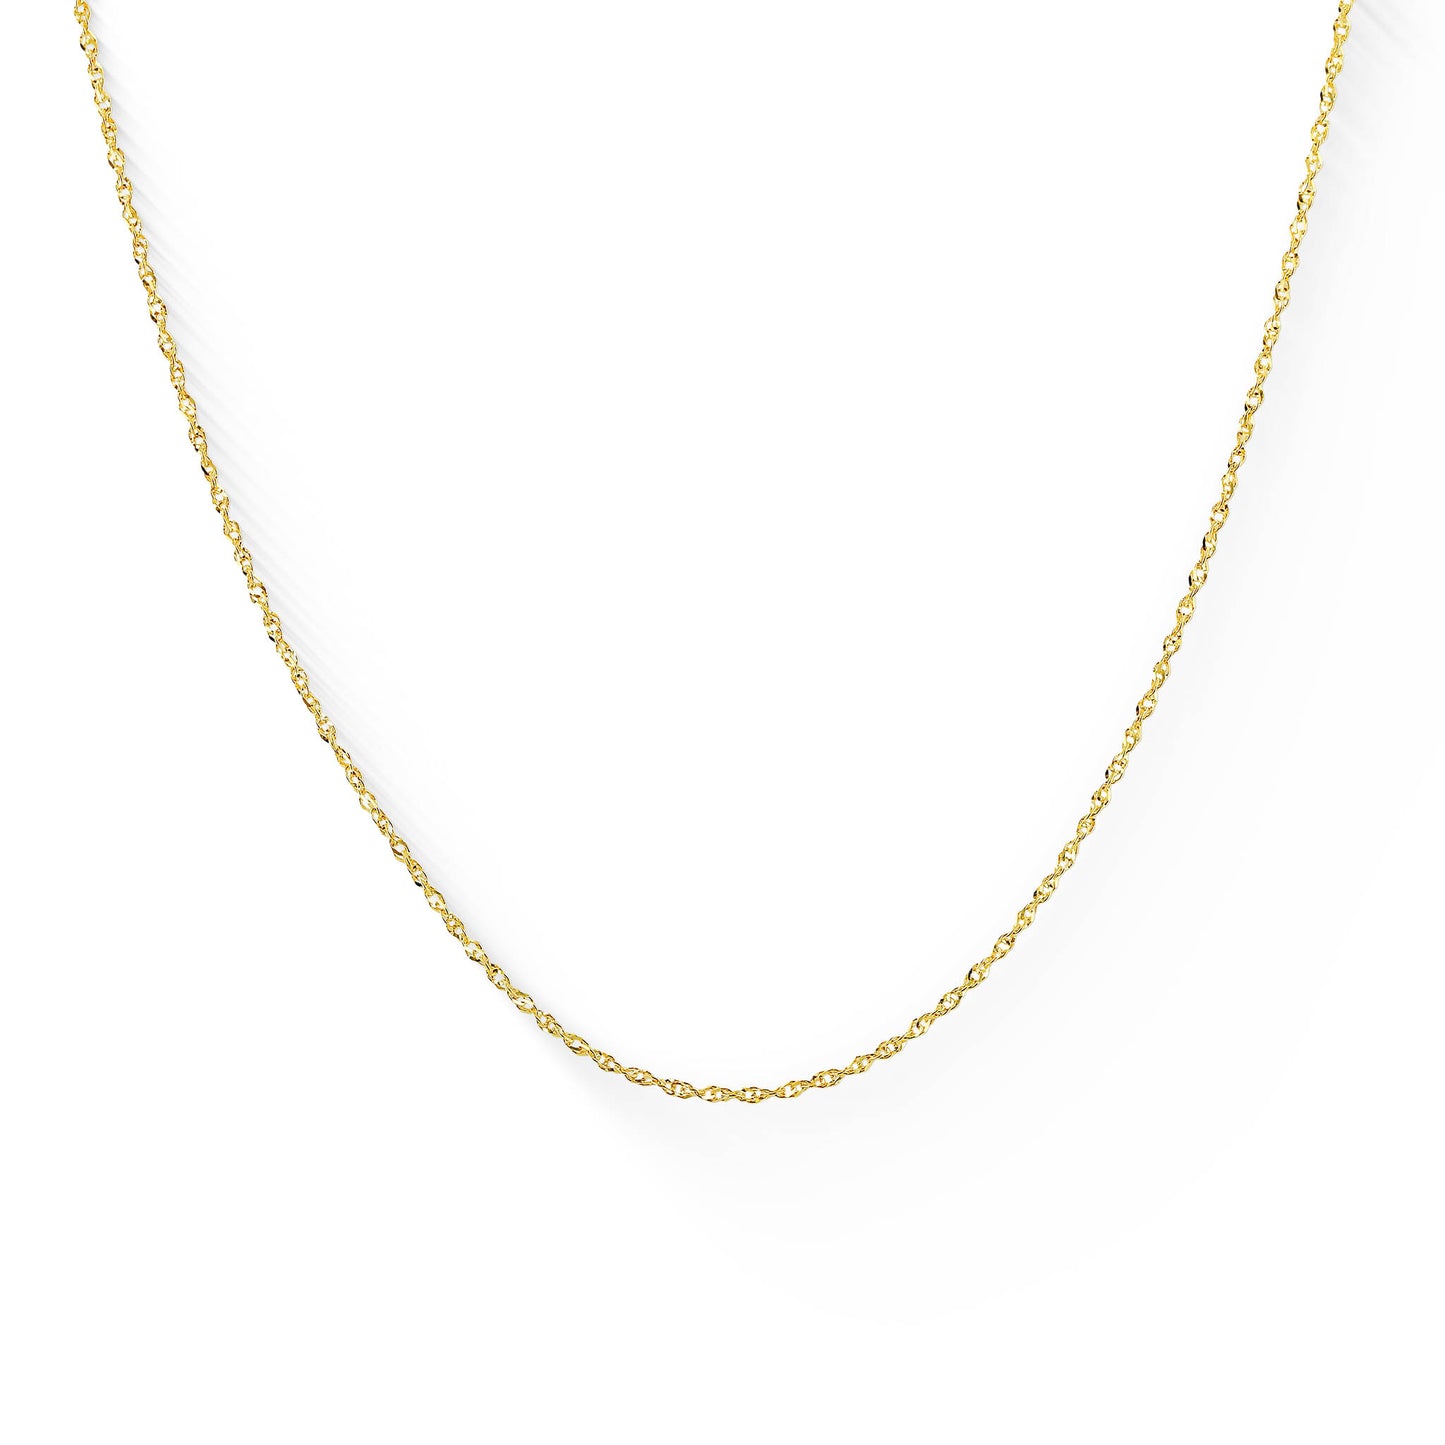 770256 - 14K Yellow Gold - 18" Sparkle Singapore Chain, 0.85mm